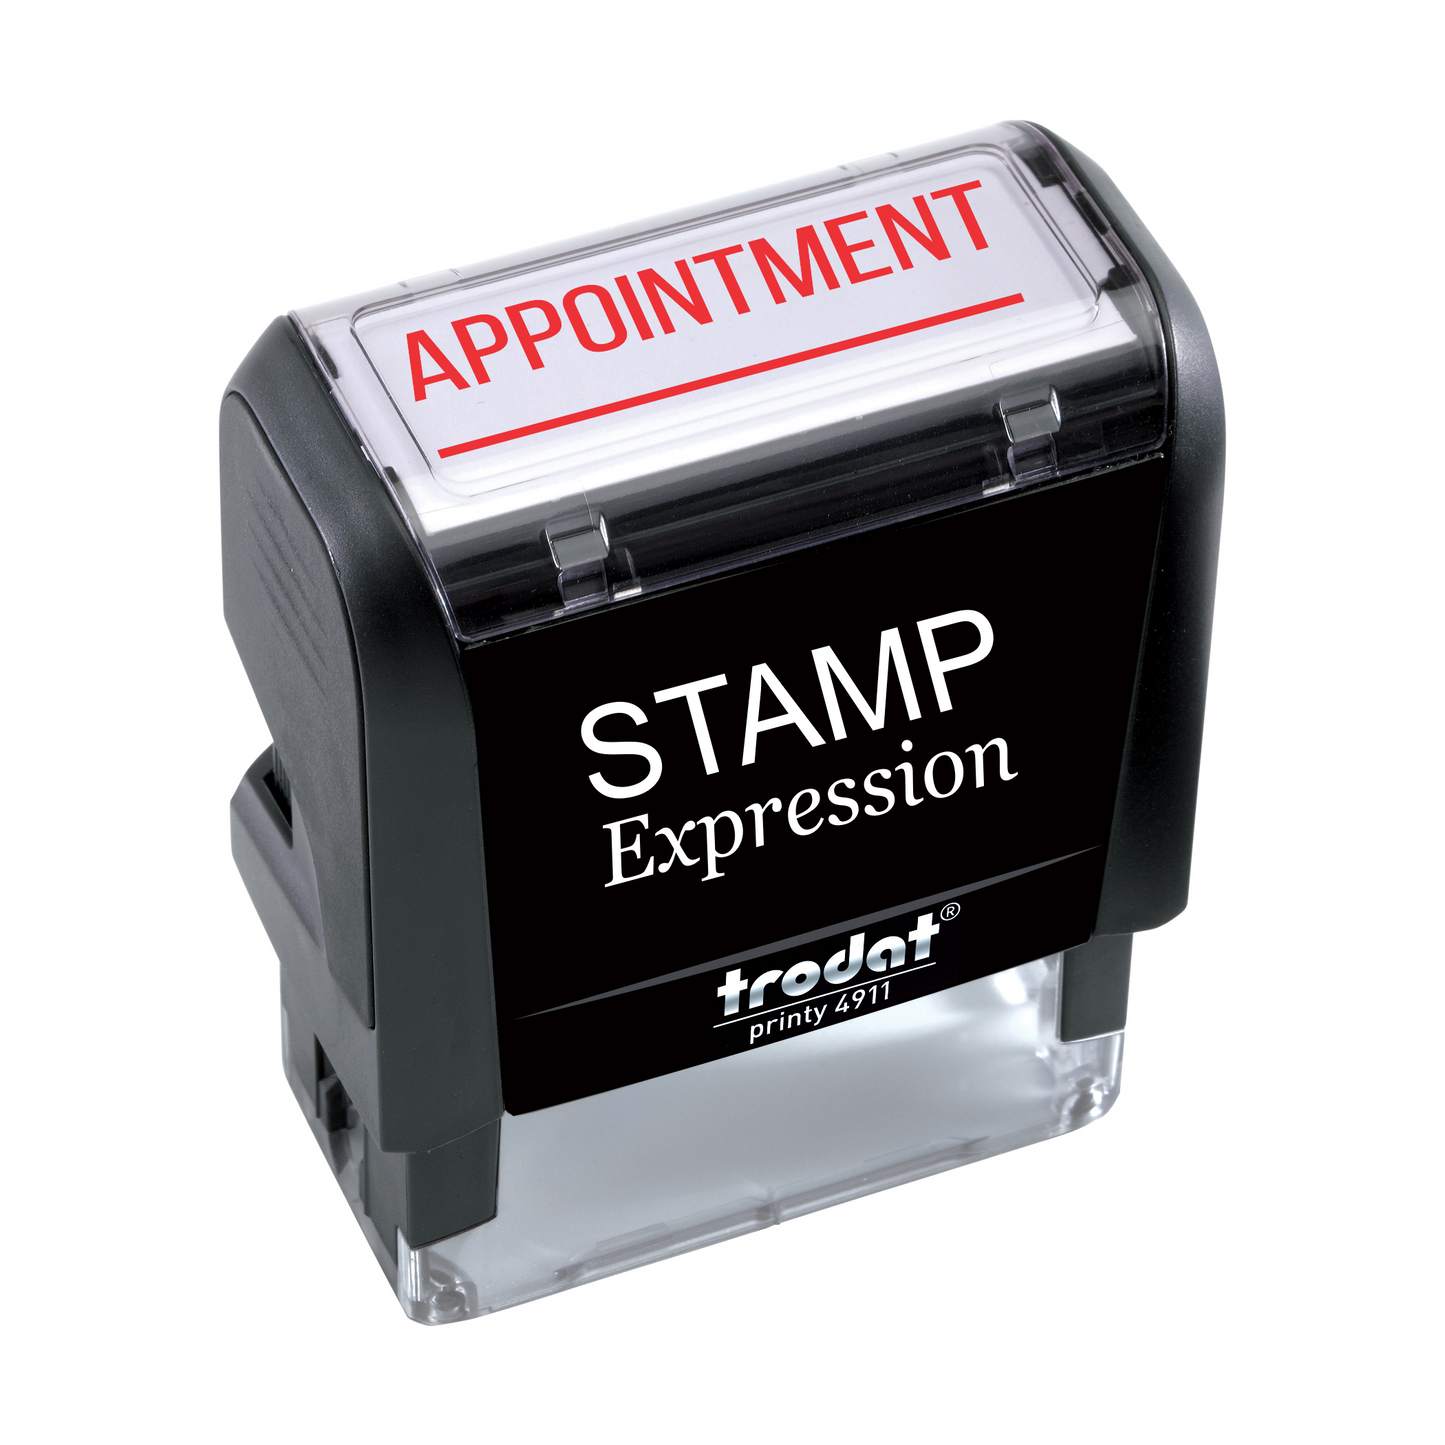 Appointment with Line Office Self Inking Rubber Stamp (SH-5200)